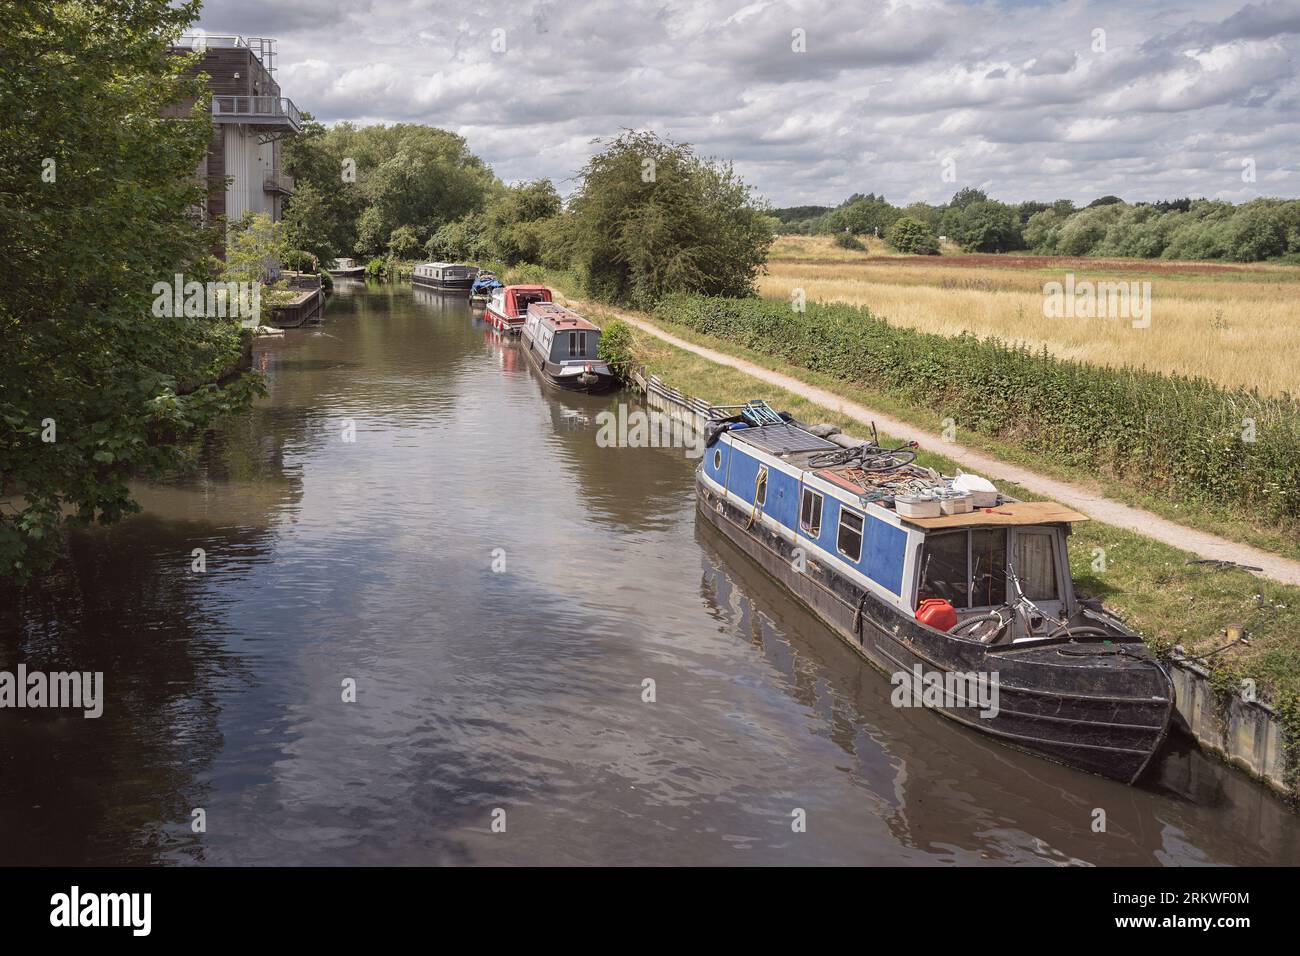 six narrowboats line one side of the river stort near Harlow England among beautiful trees and farmland on a sunny day with a cloudy sky background Stock Photo